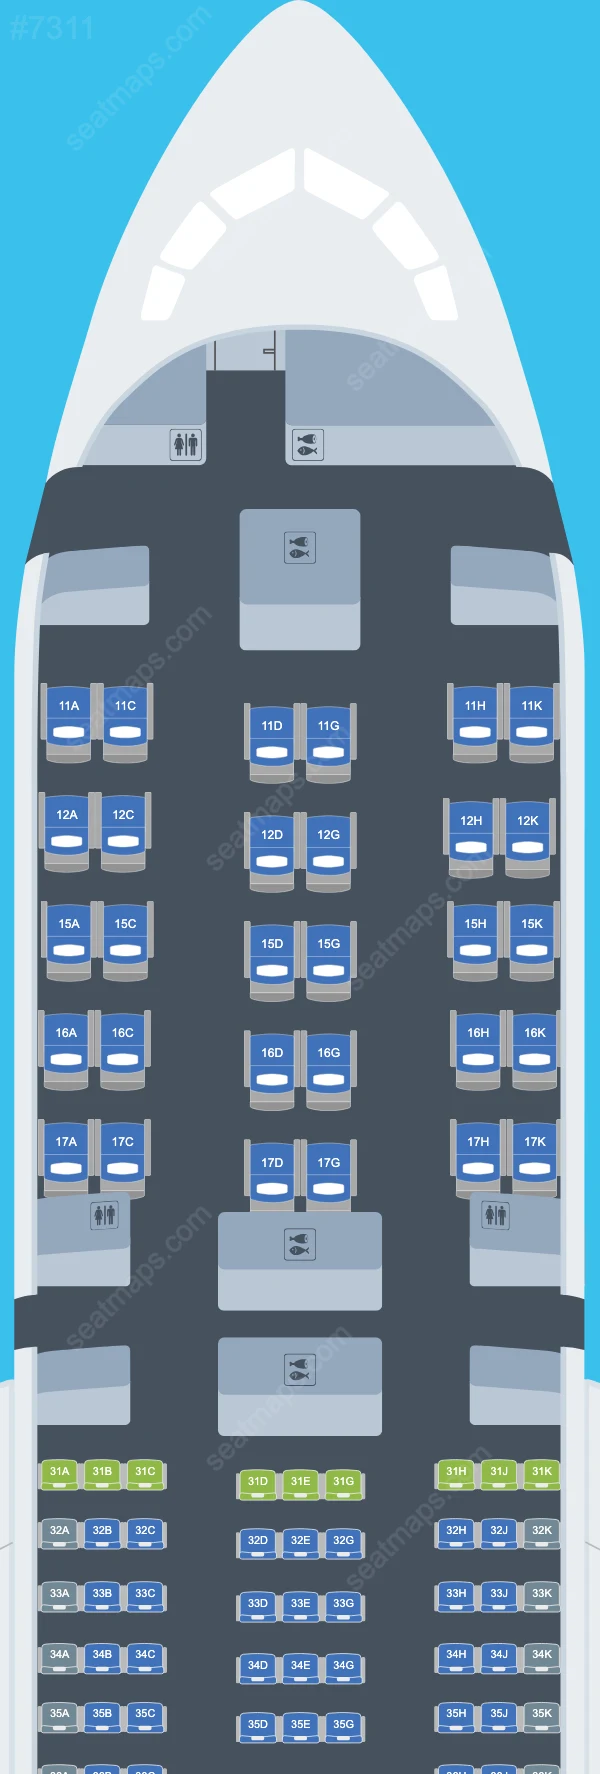 Hainan Airlines Boeing 787-9 seatmap mobile preview